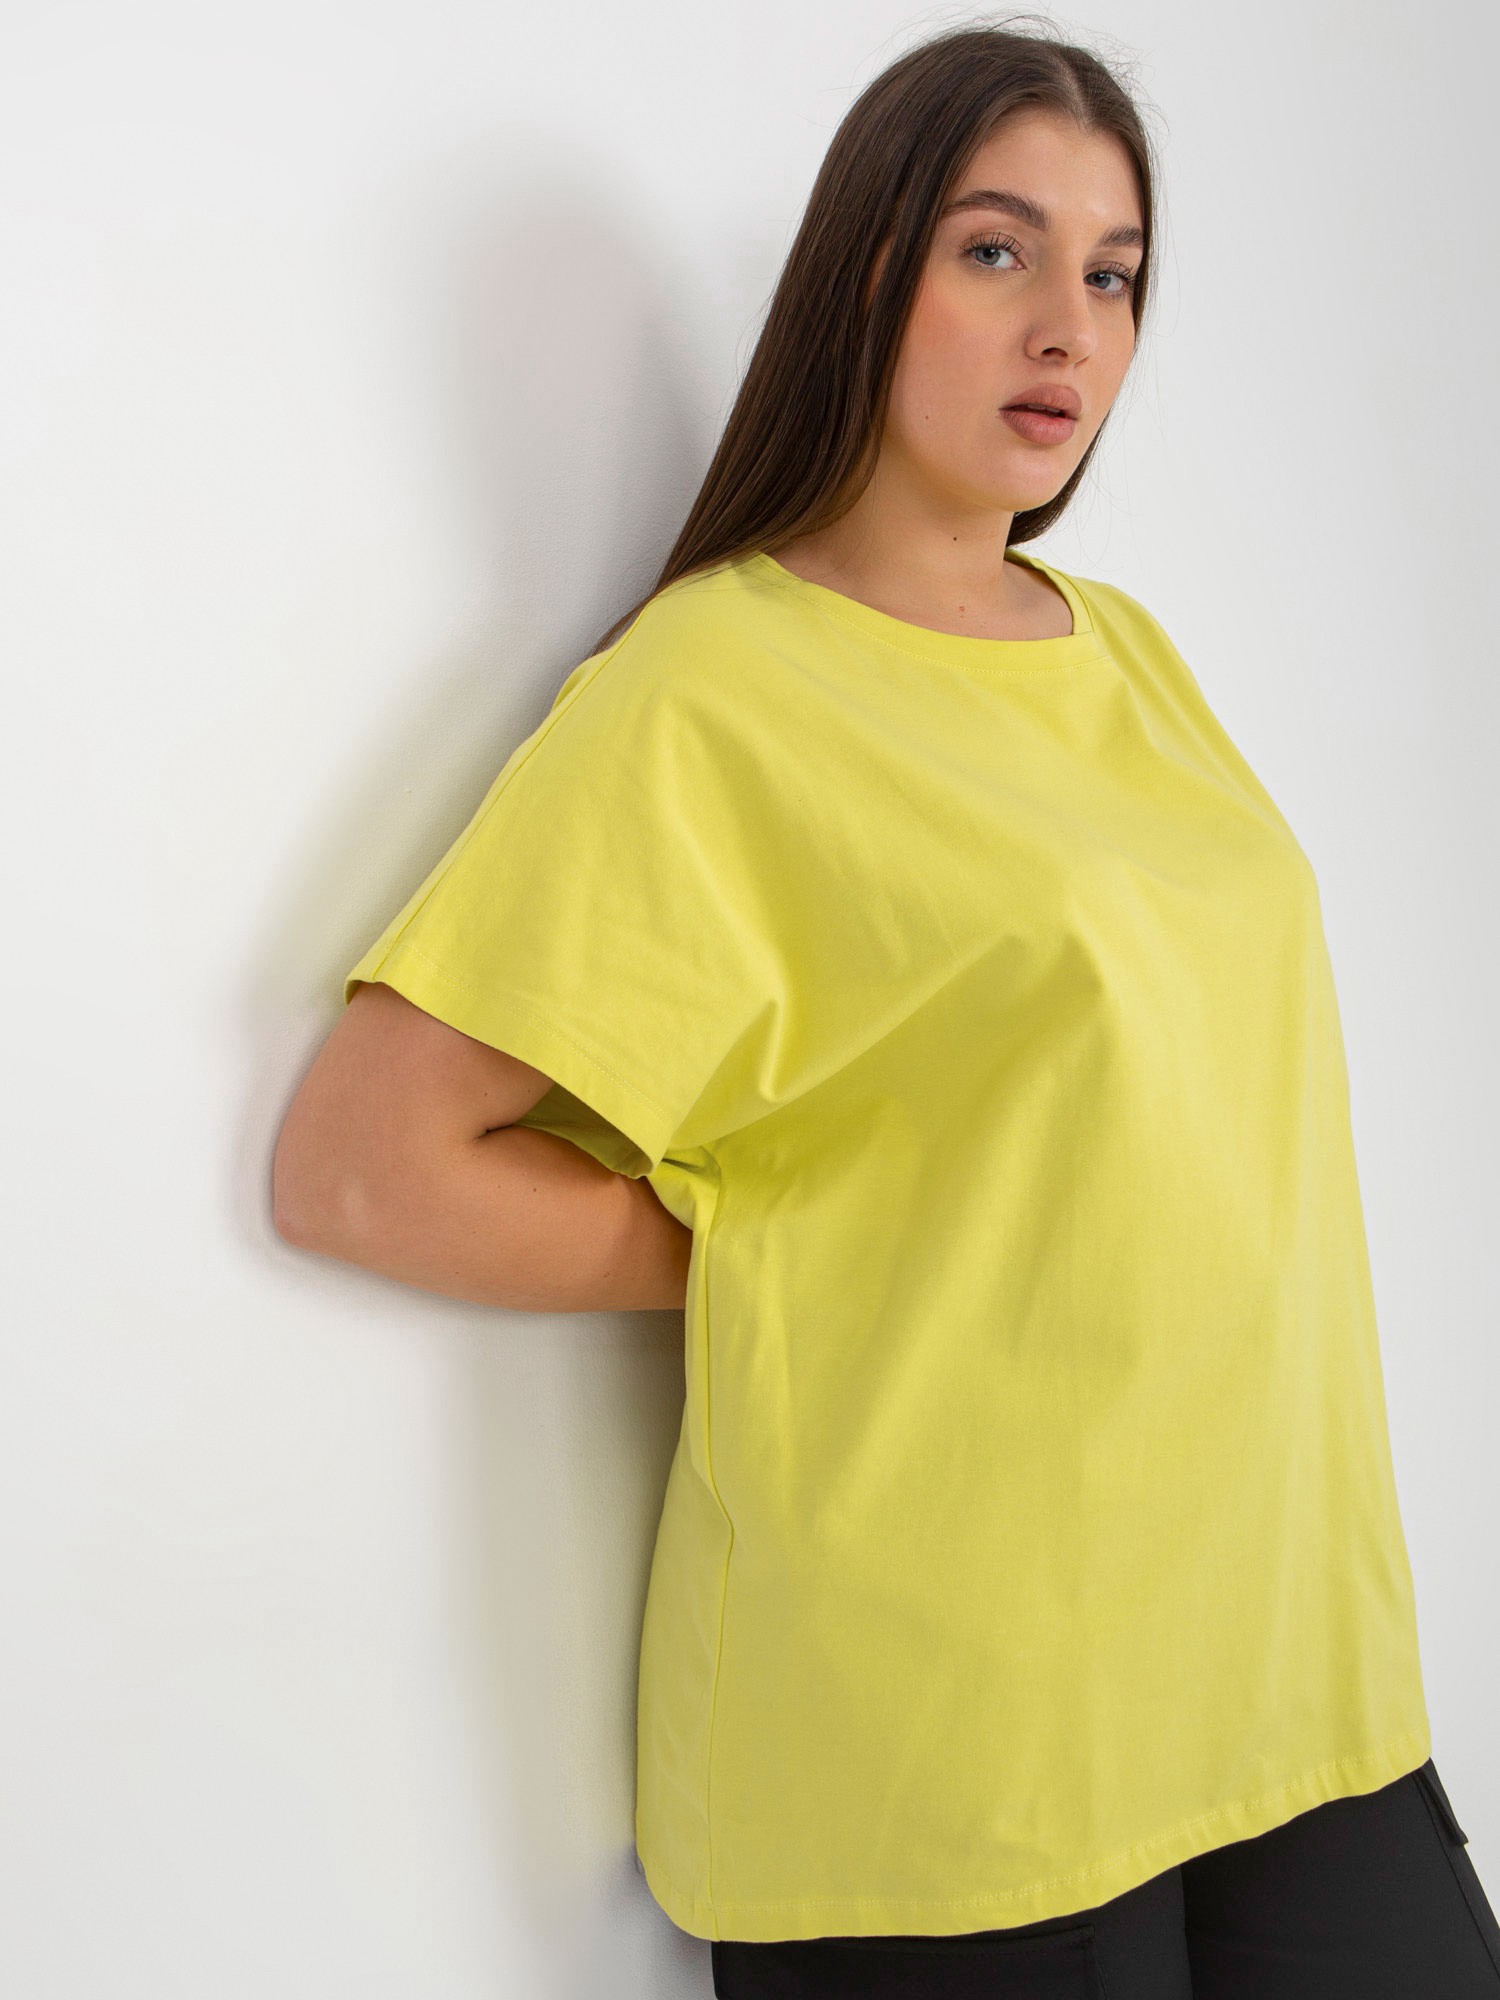 Lightweight Lime Women's T-shirt Plus Size Loose Fit